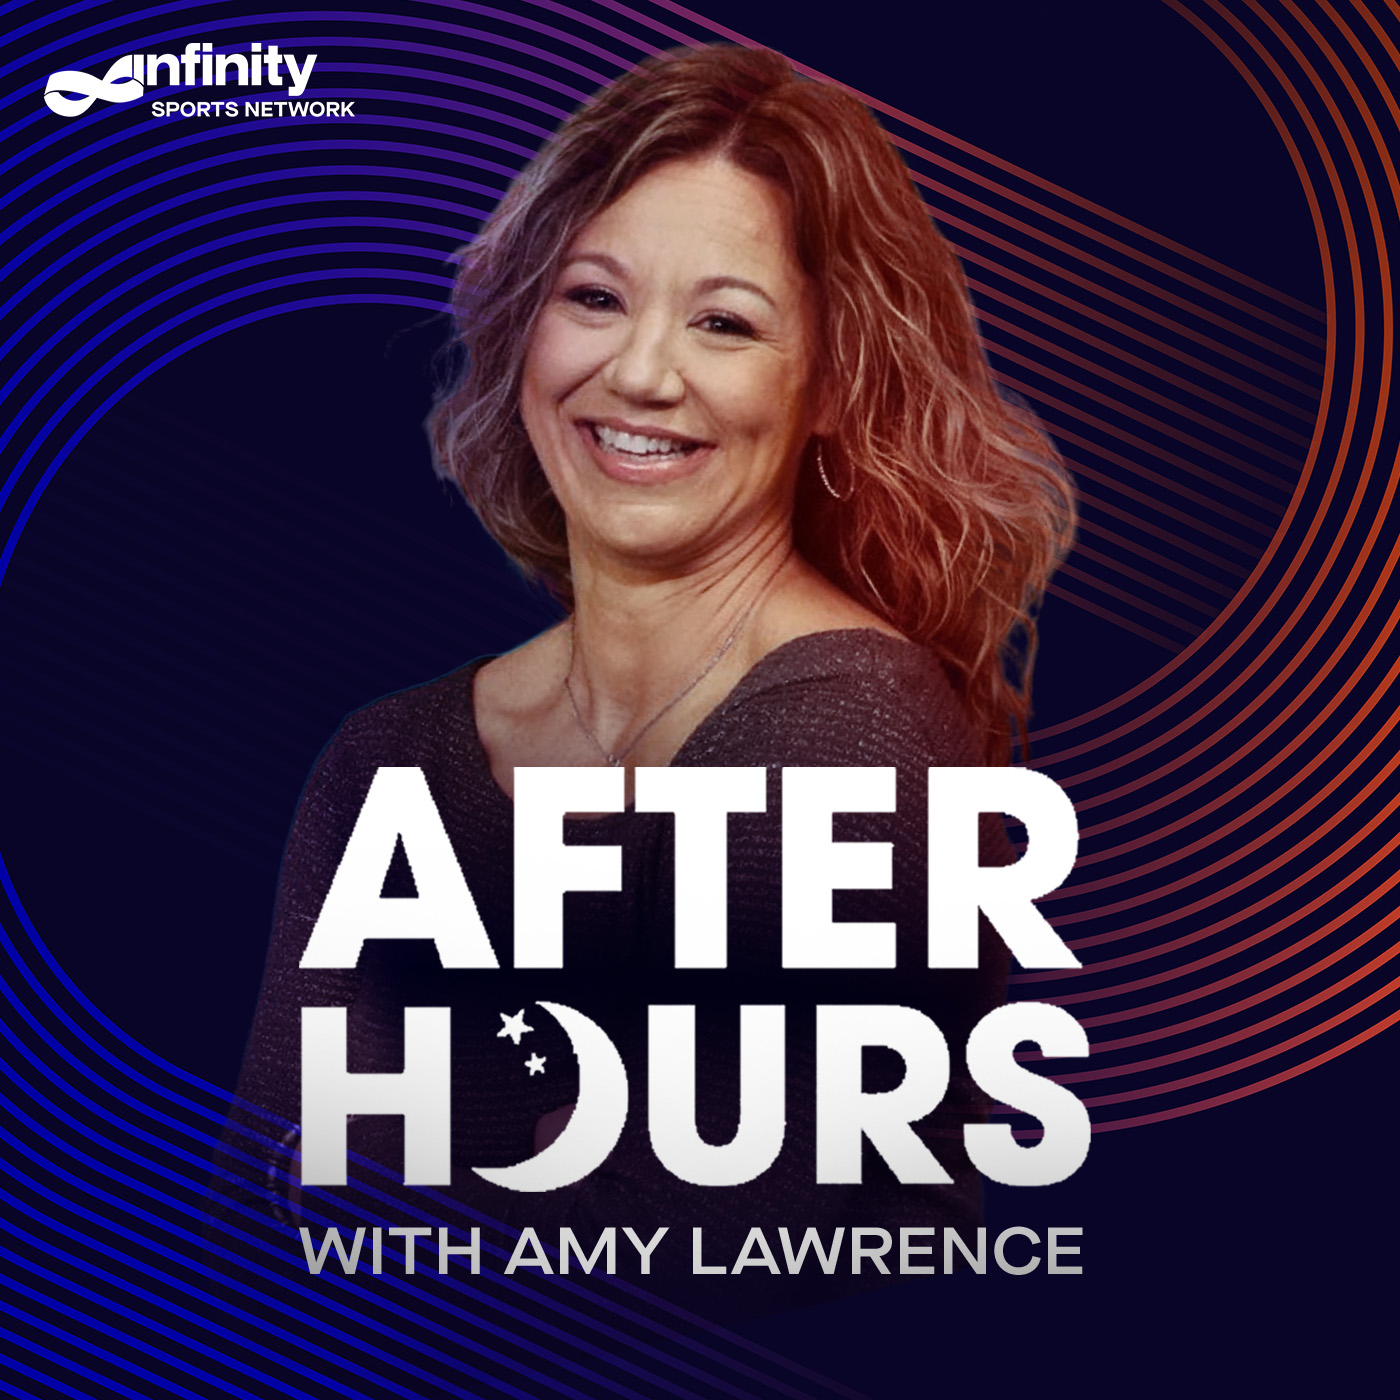 10-29-21 After Hours with Amy Lawrence PODCAST: Hour 1